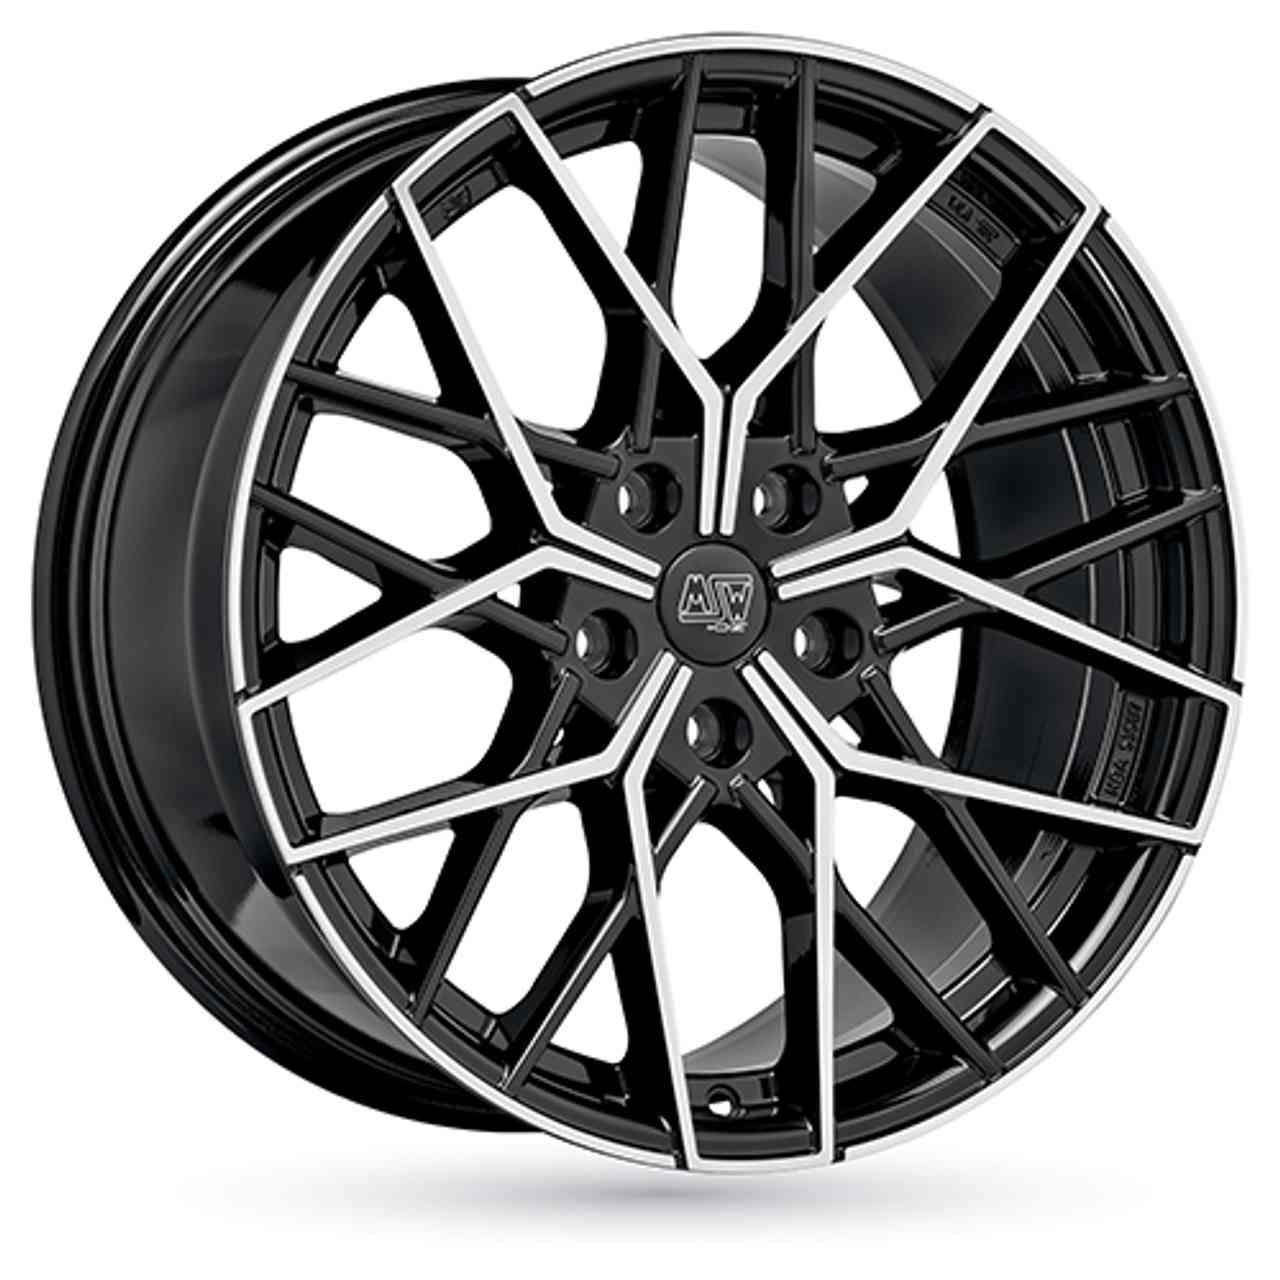 MSW (OZ) MSW 74 gloss black full polished 9.0Jx20 5x112 ET35